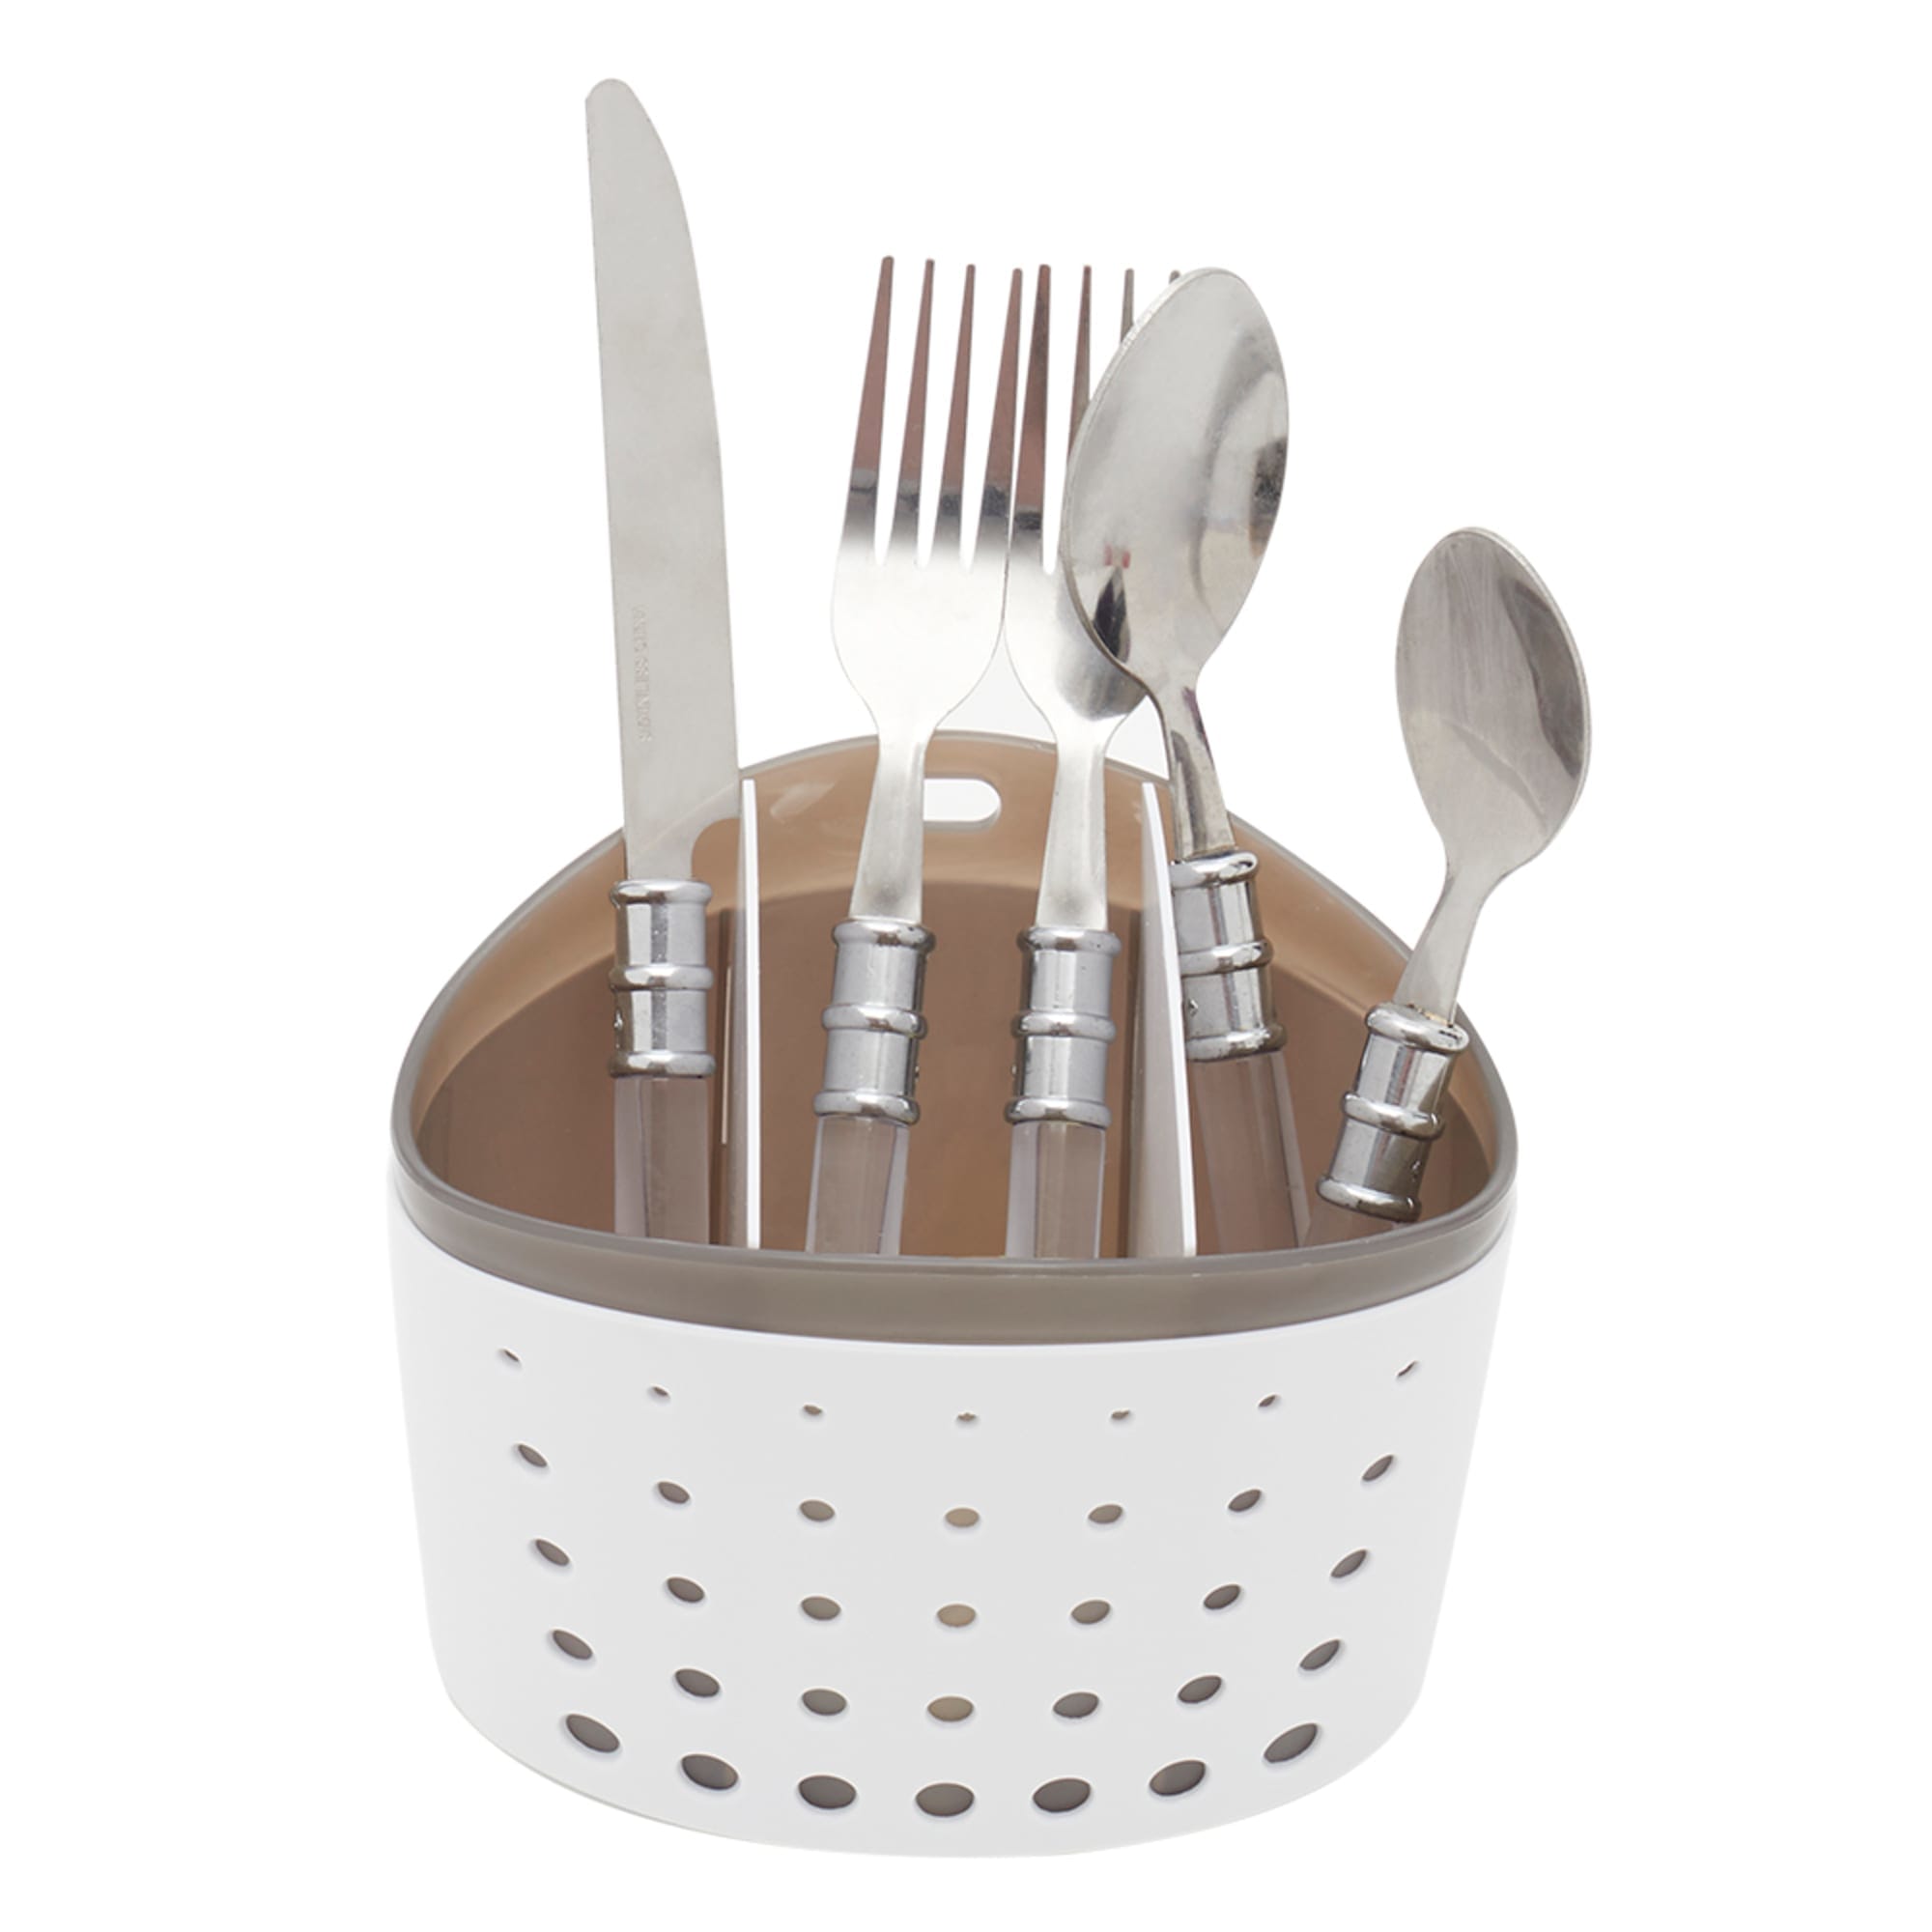 Home Basics 3 Section Perforated Plastic Cutlery Holder with Removable Inserts, White $2.50 EACH, CASE PACK OF 24